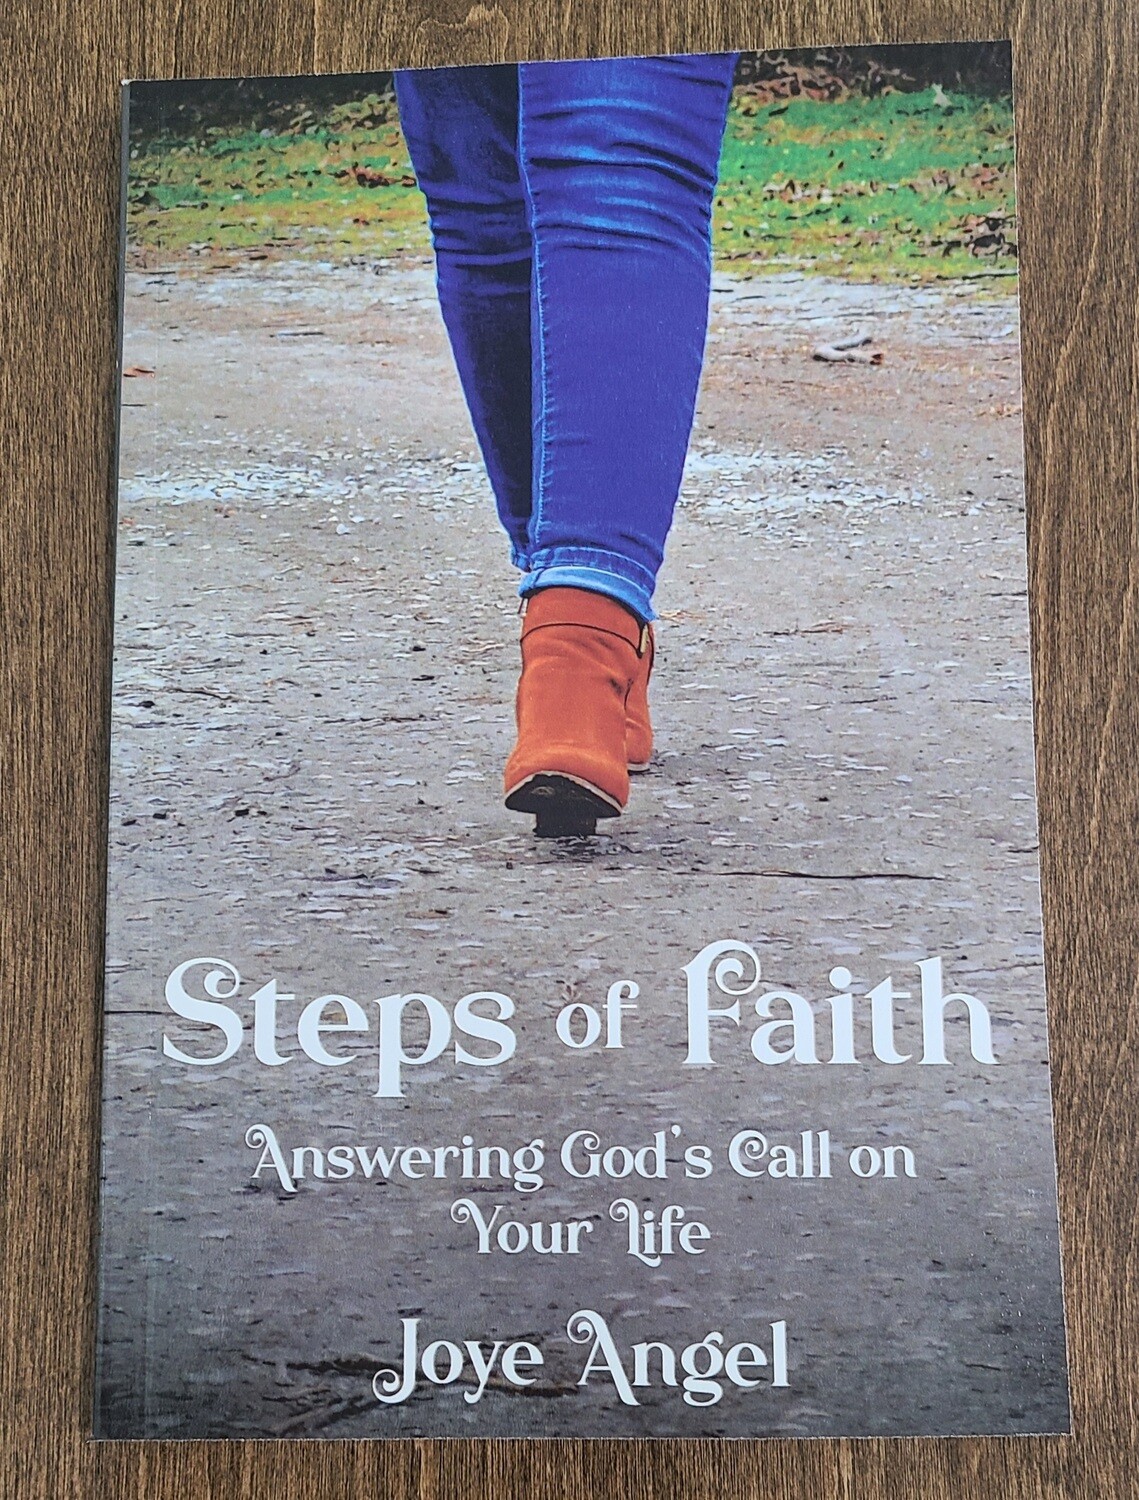 Steps of Faith: Answering God's Call on Your Life by Joye Angel - Paperback (Autographed)